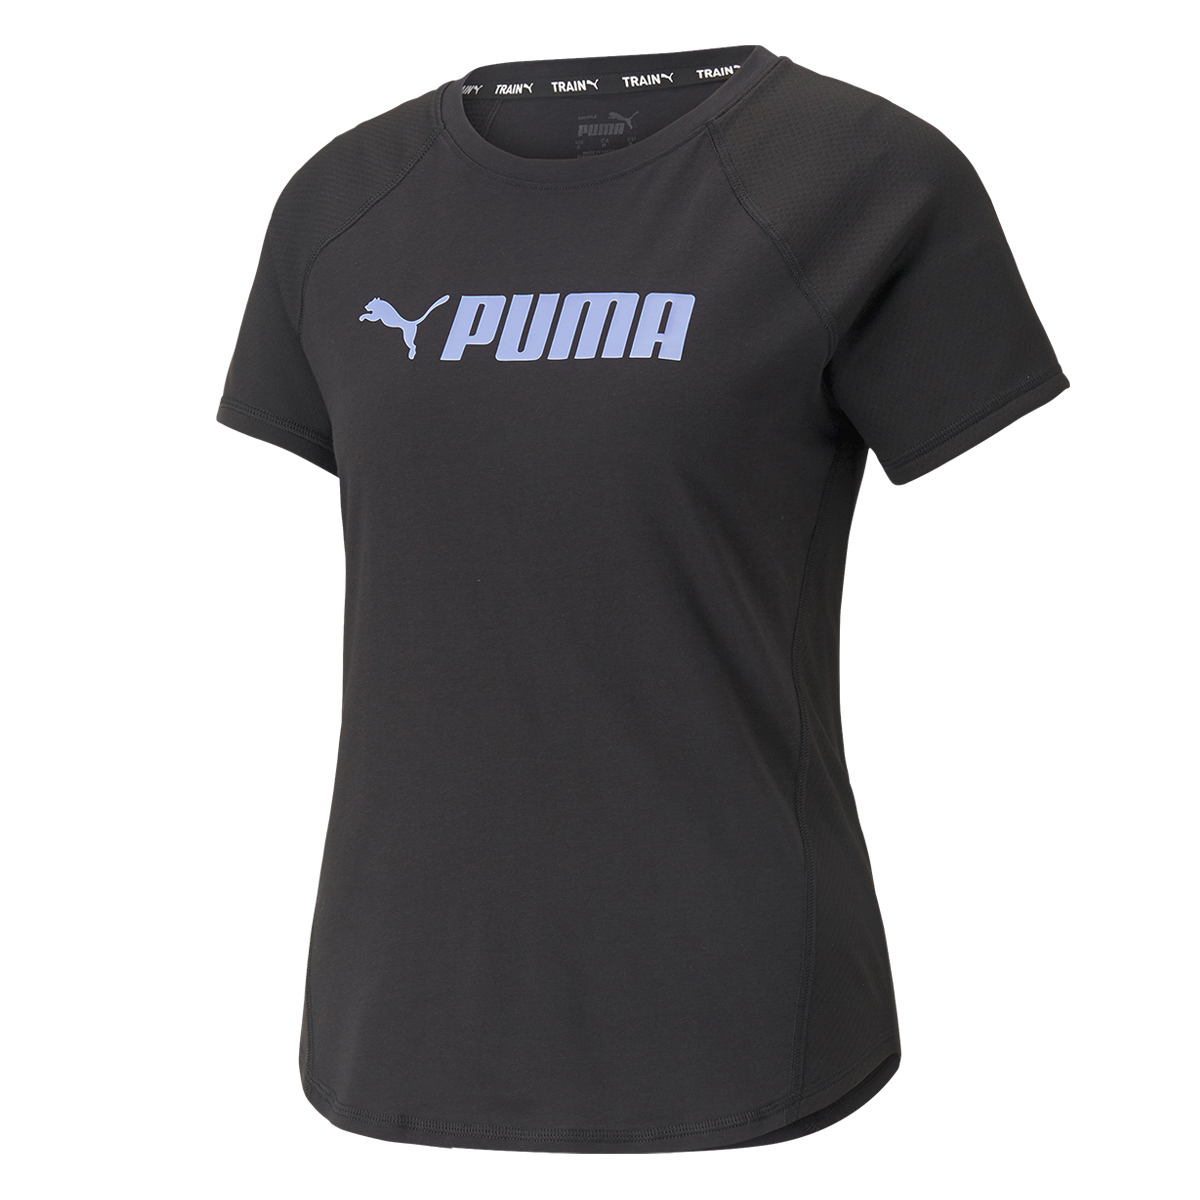 Remera Entrenamiento Puma Fit Logo Mujer,  image number null